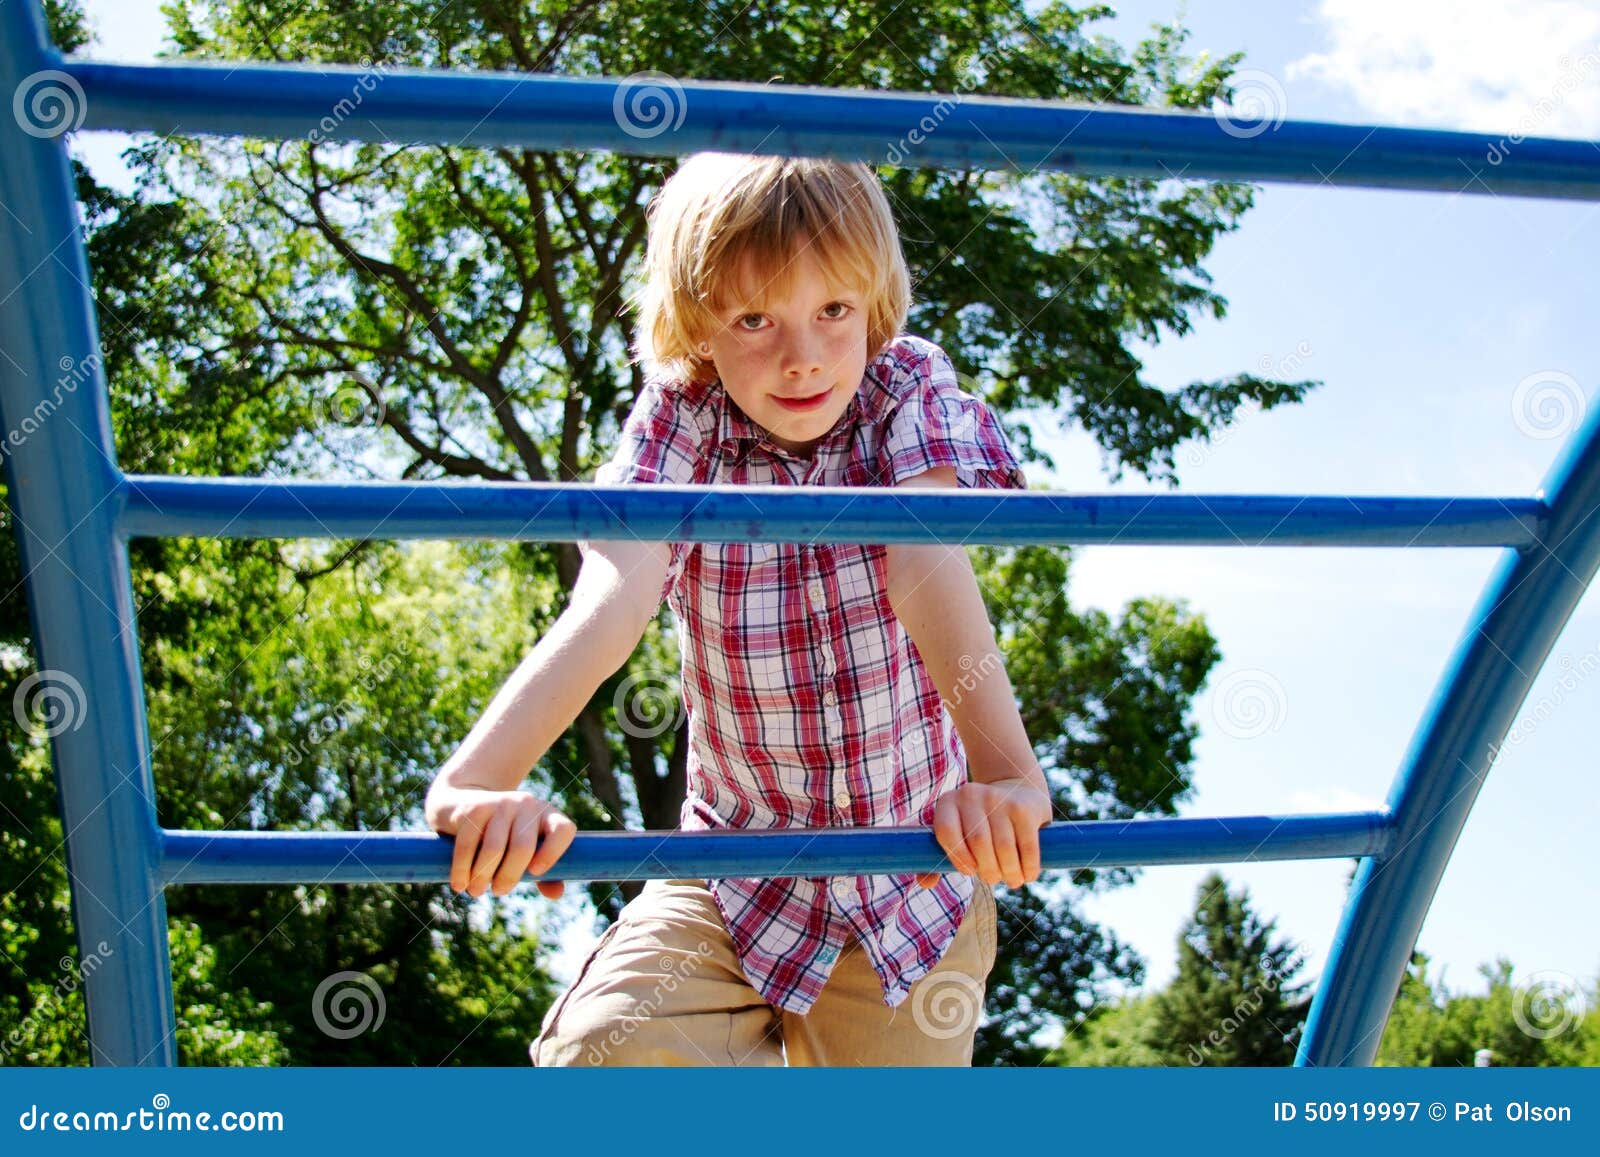 young lad climbing on playground